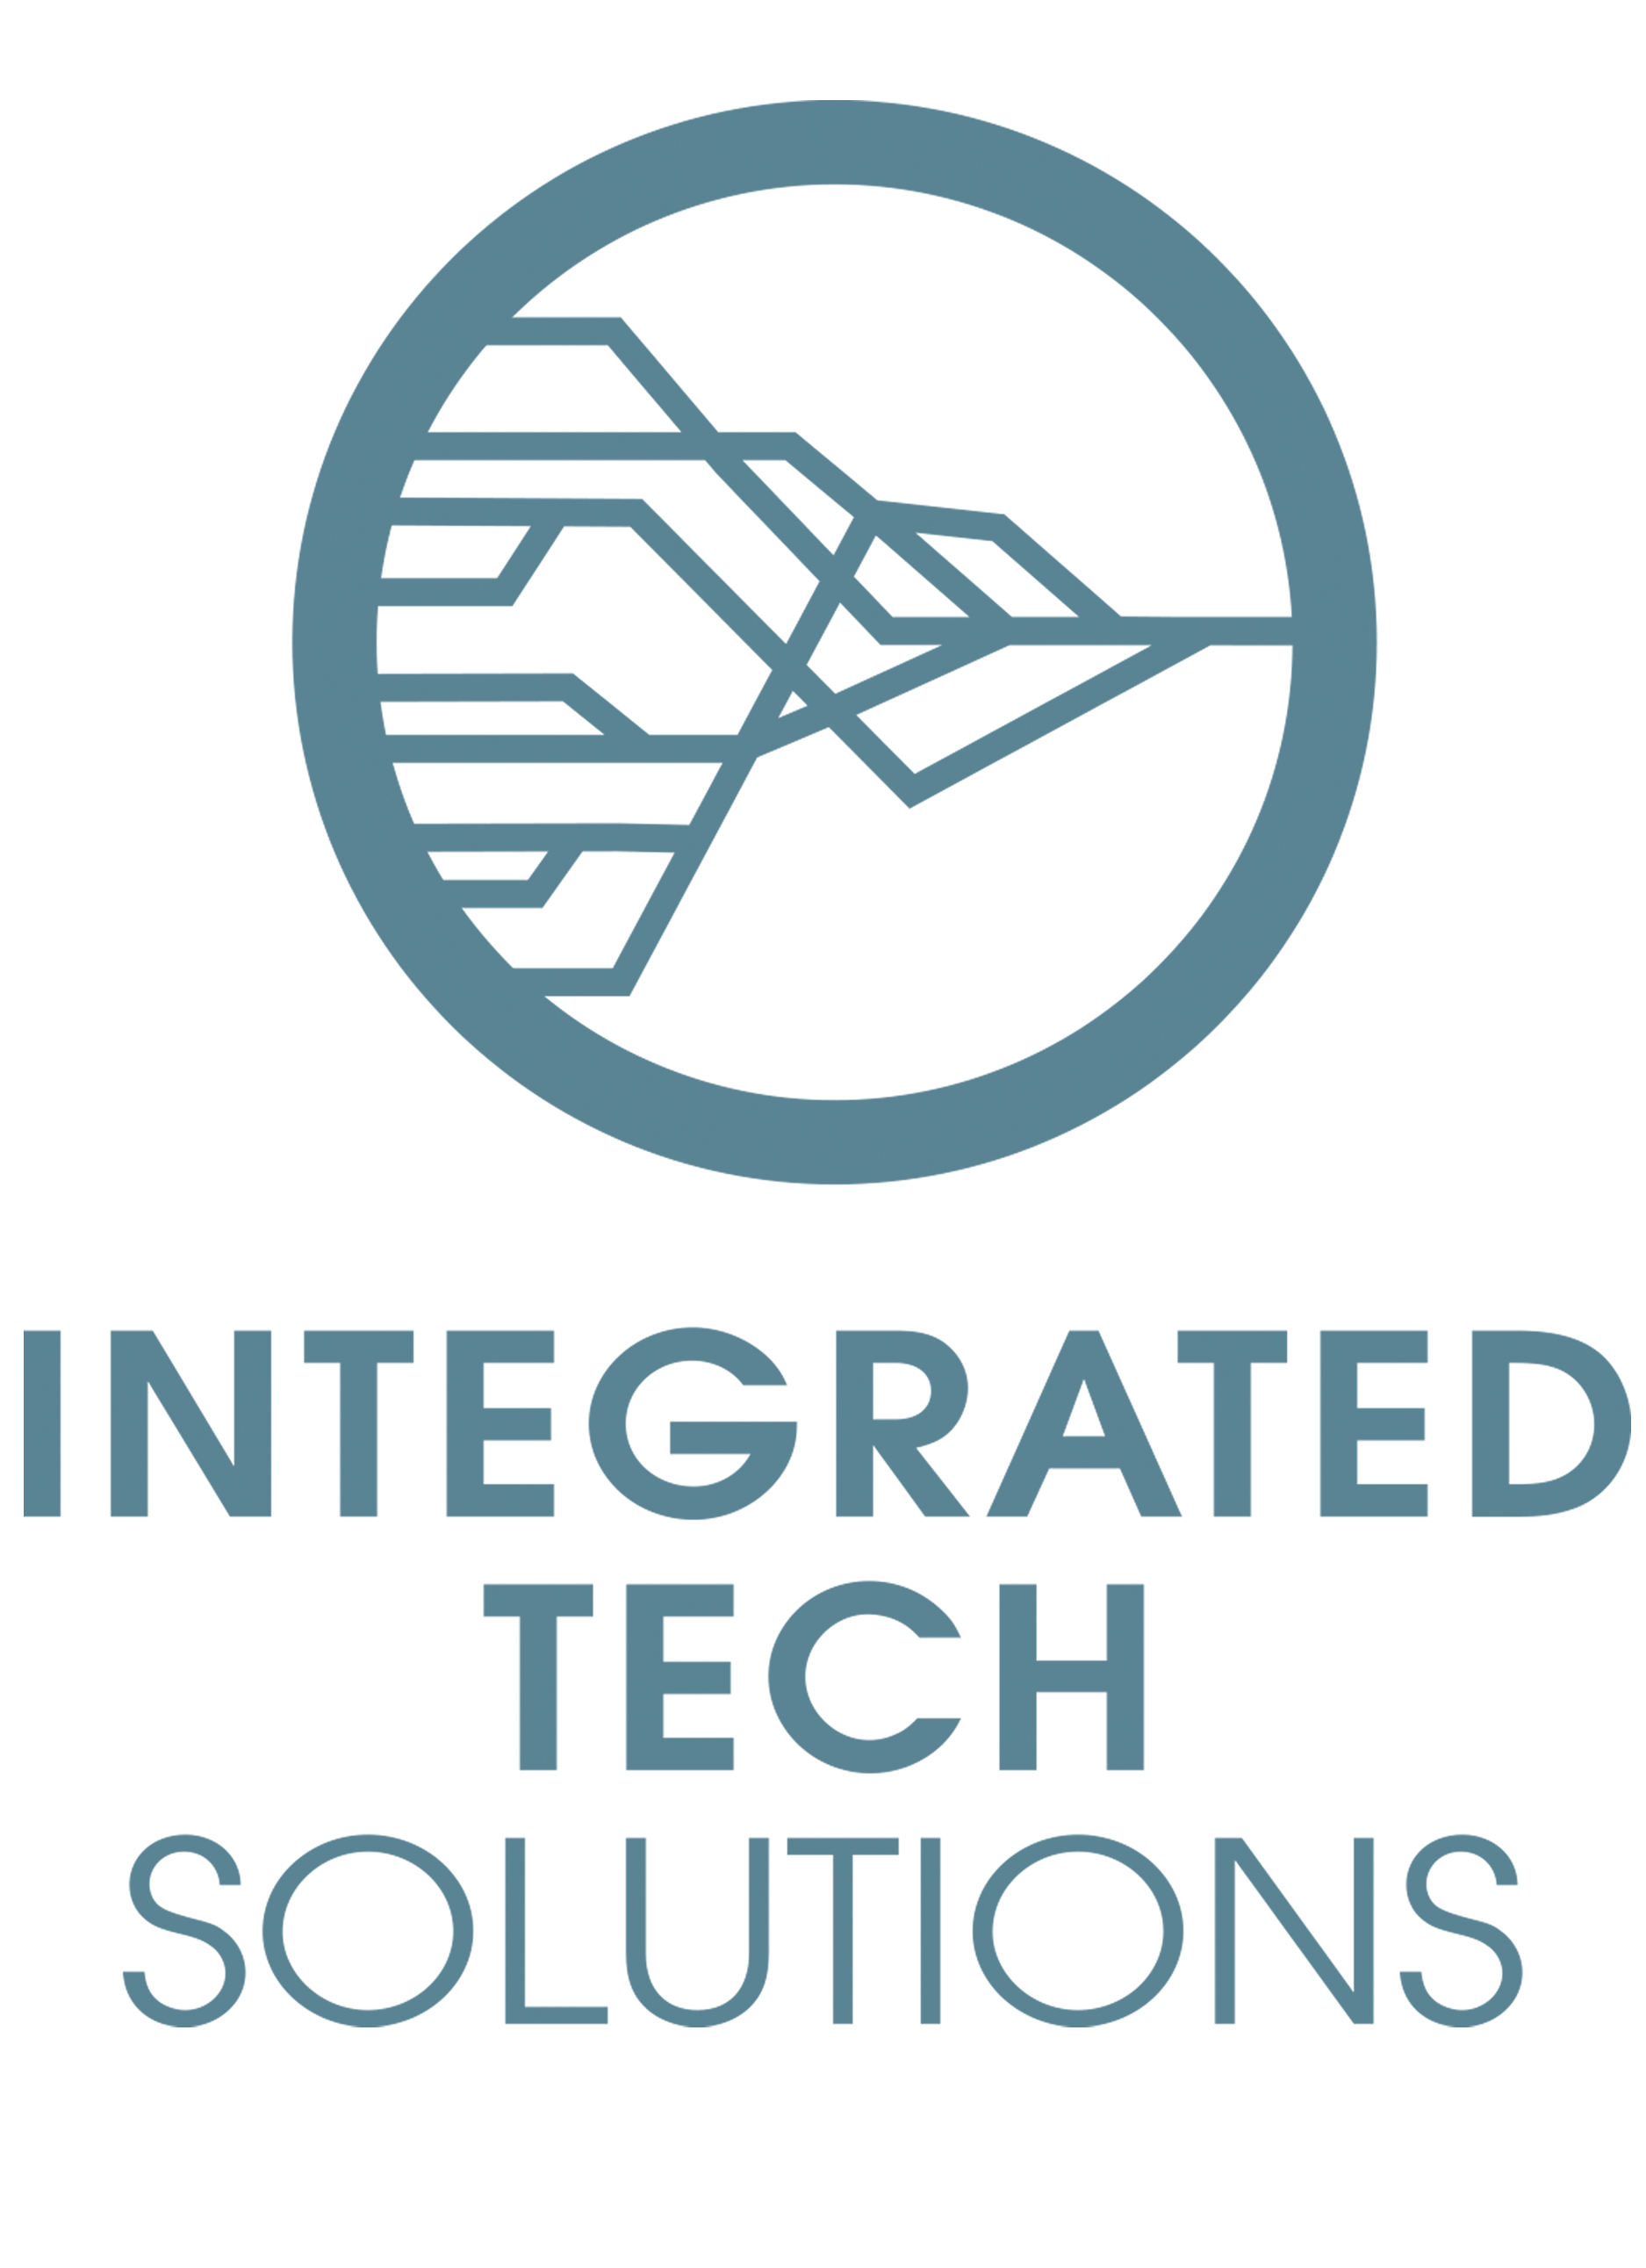 CITCO Water Integrated Tech Solutions Huntington WV